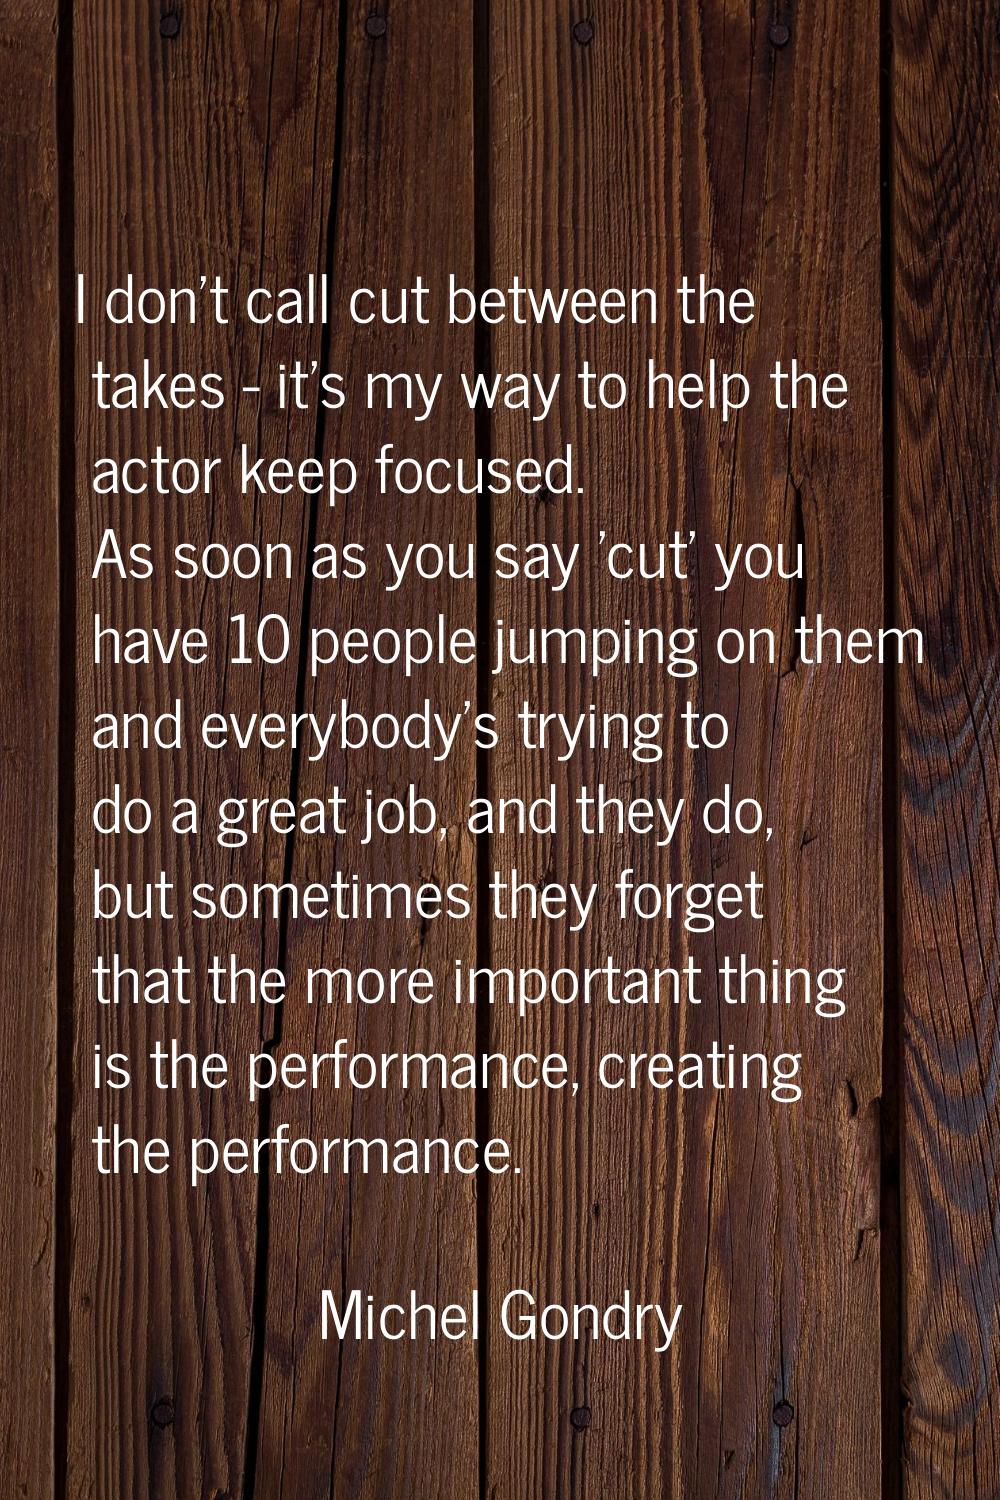 I don't call cut between the takes - it's my way to help the actor keep focused. As soon as you say